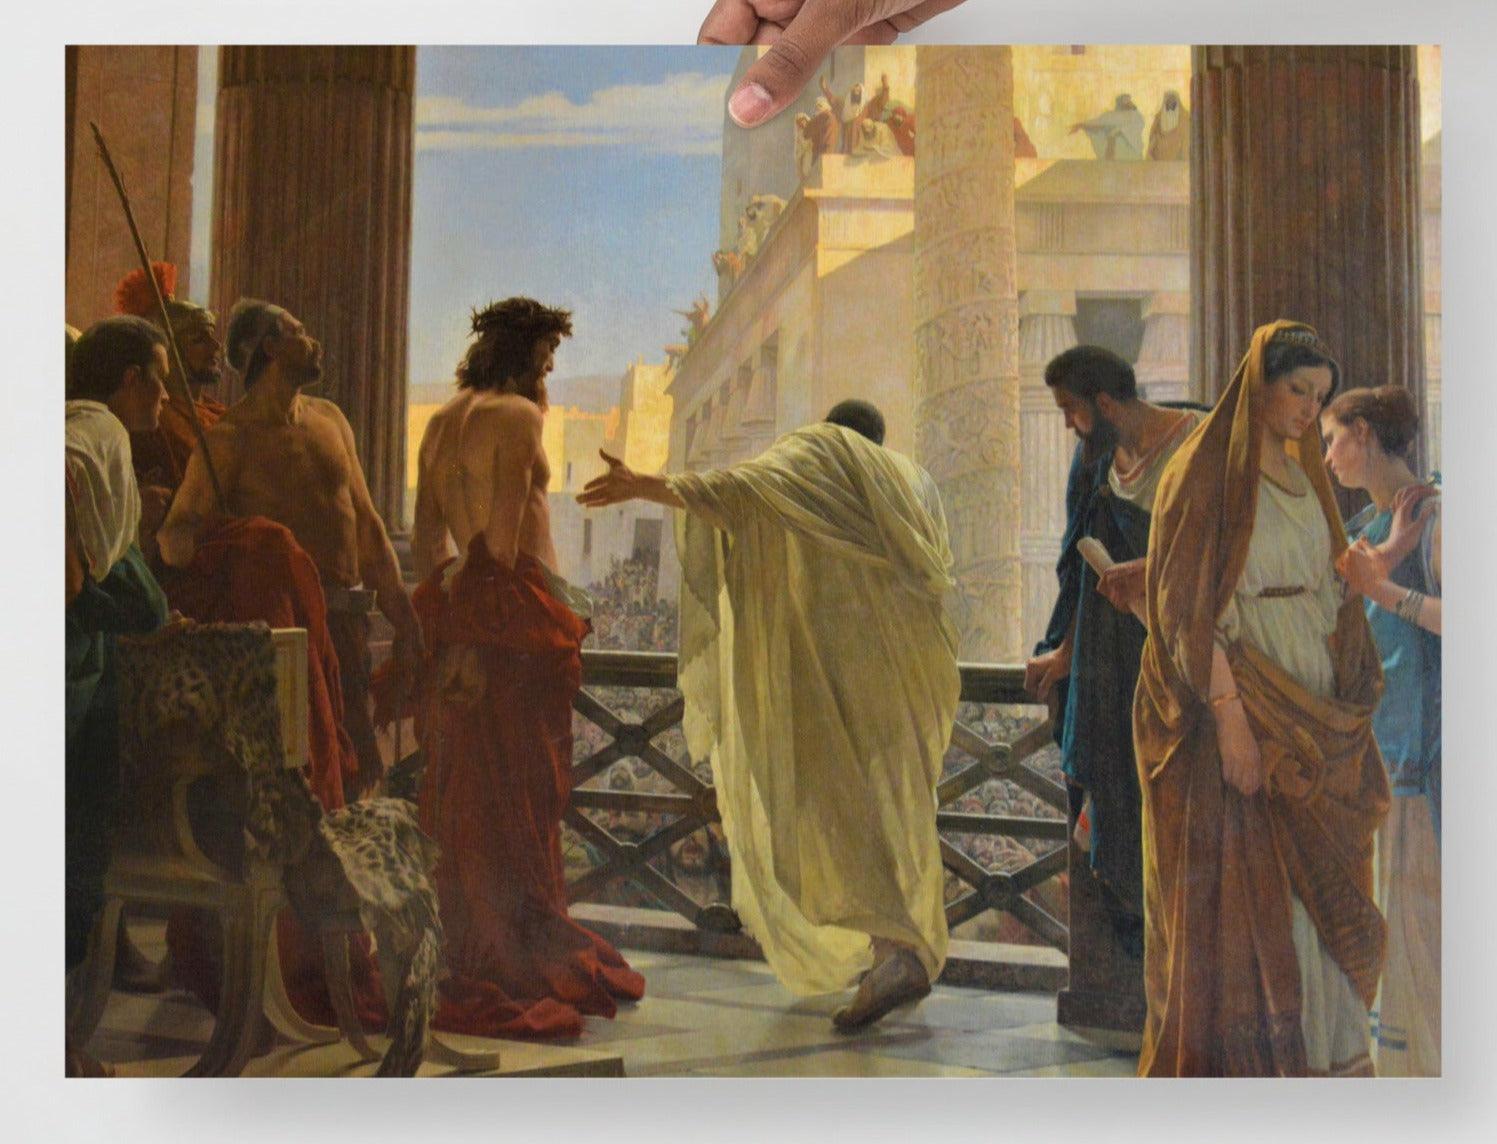 An Ecce Homo by Antonio Ciseri poster on a plain backdrop in size 18x24”.